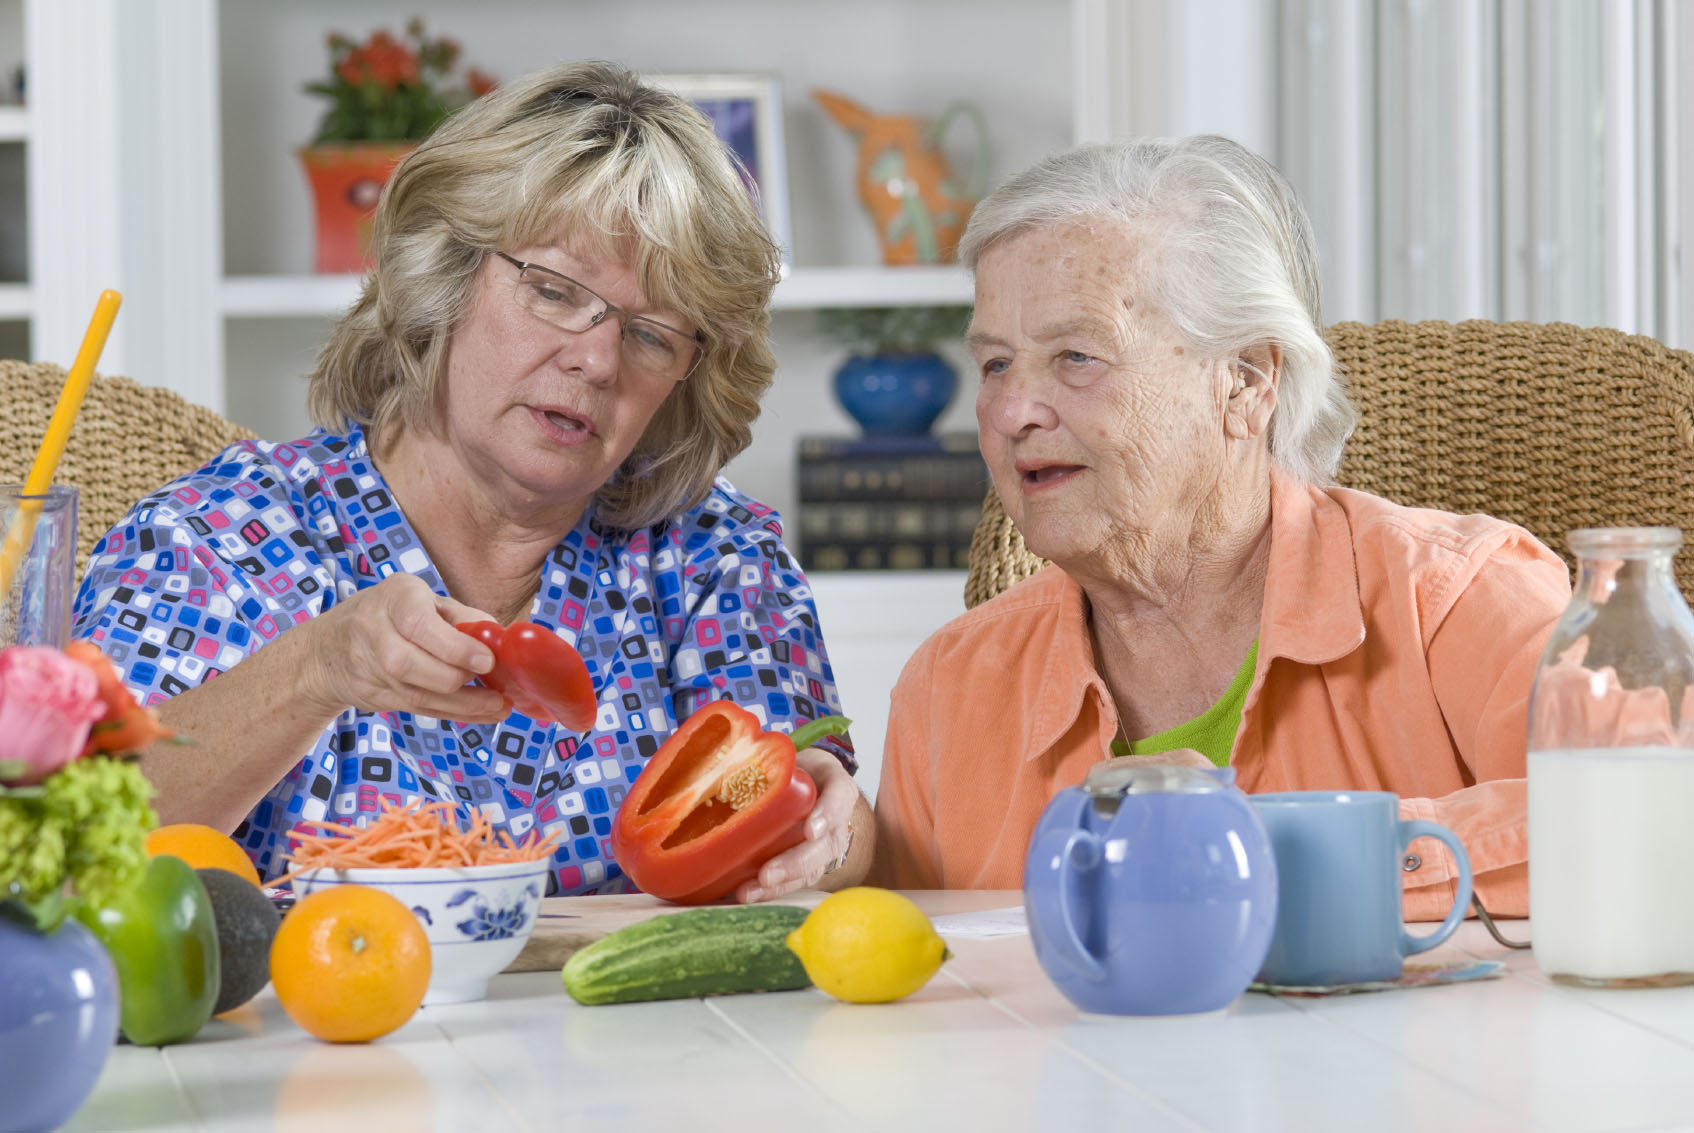 A caregiver helping a senior woman with meal preparation